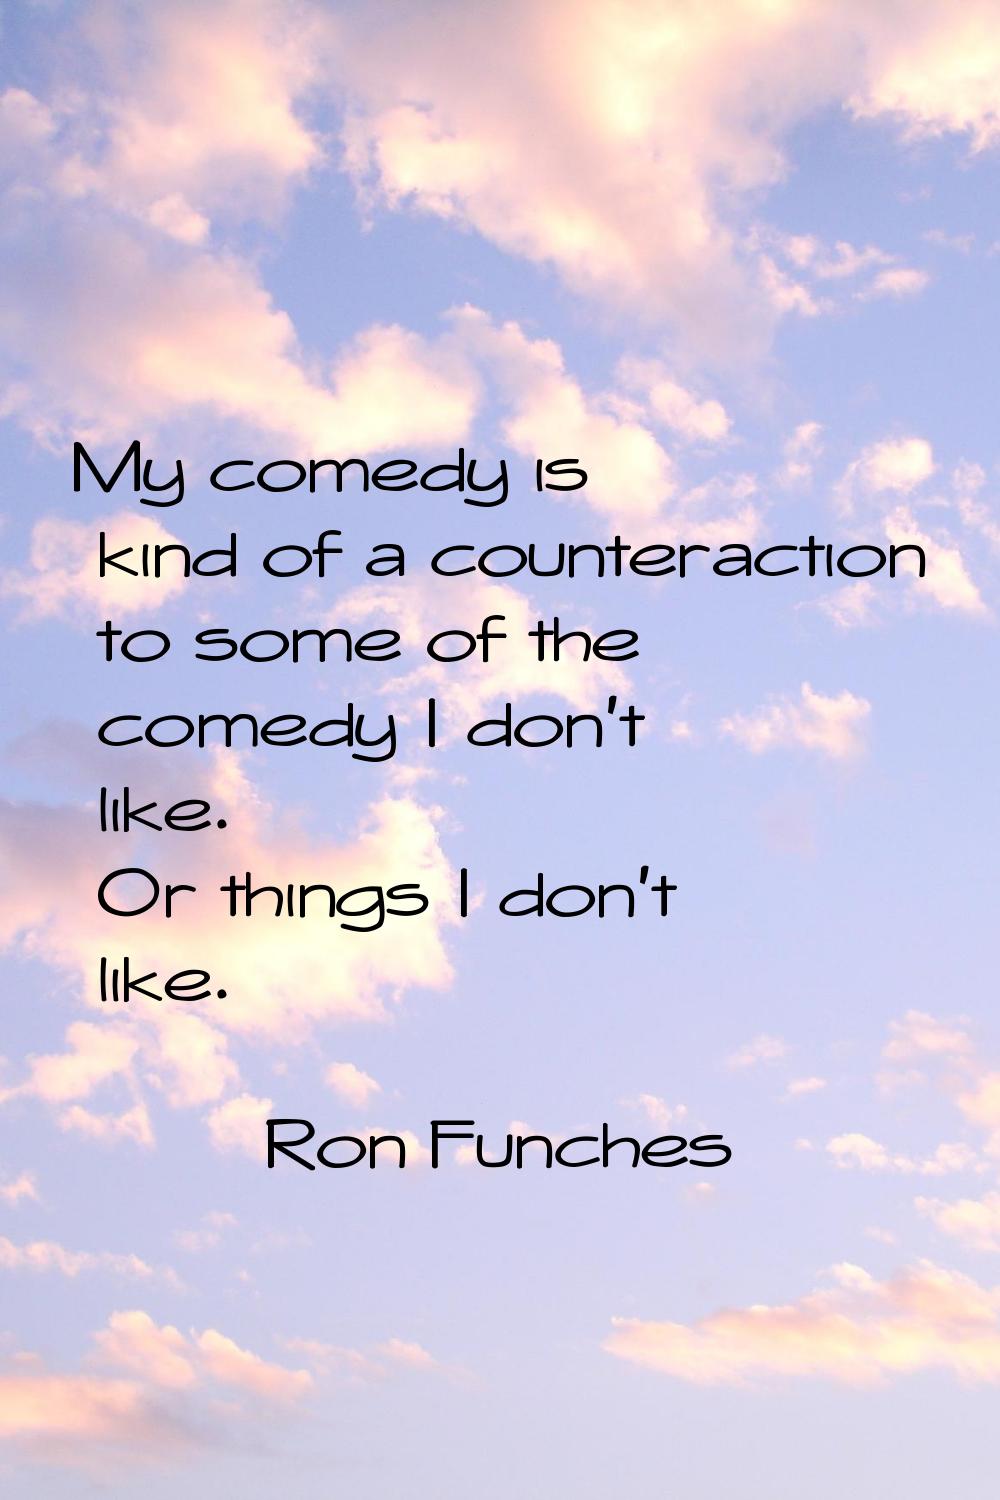 My comedy is kind of a counteraction to some of the comedy I don't like. Or things I don't like.